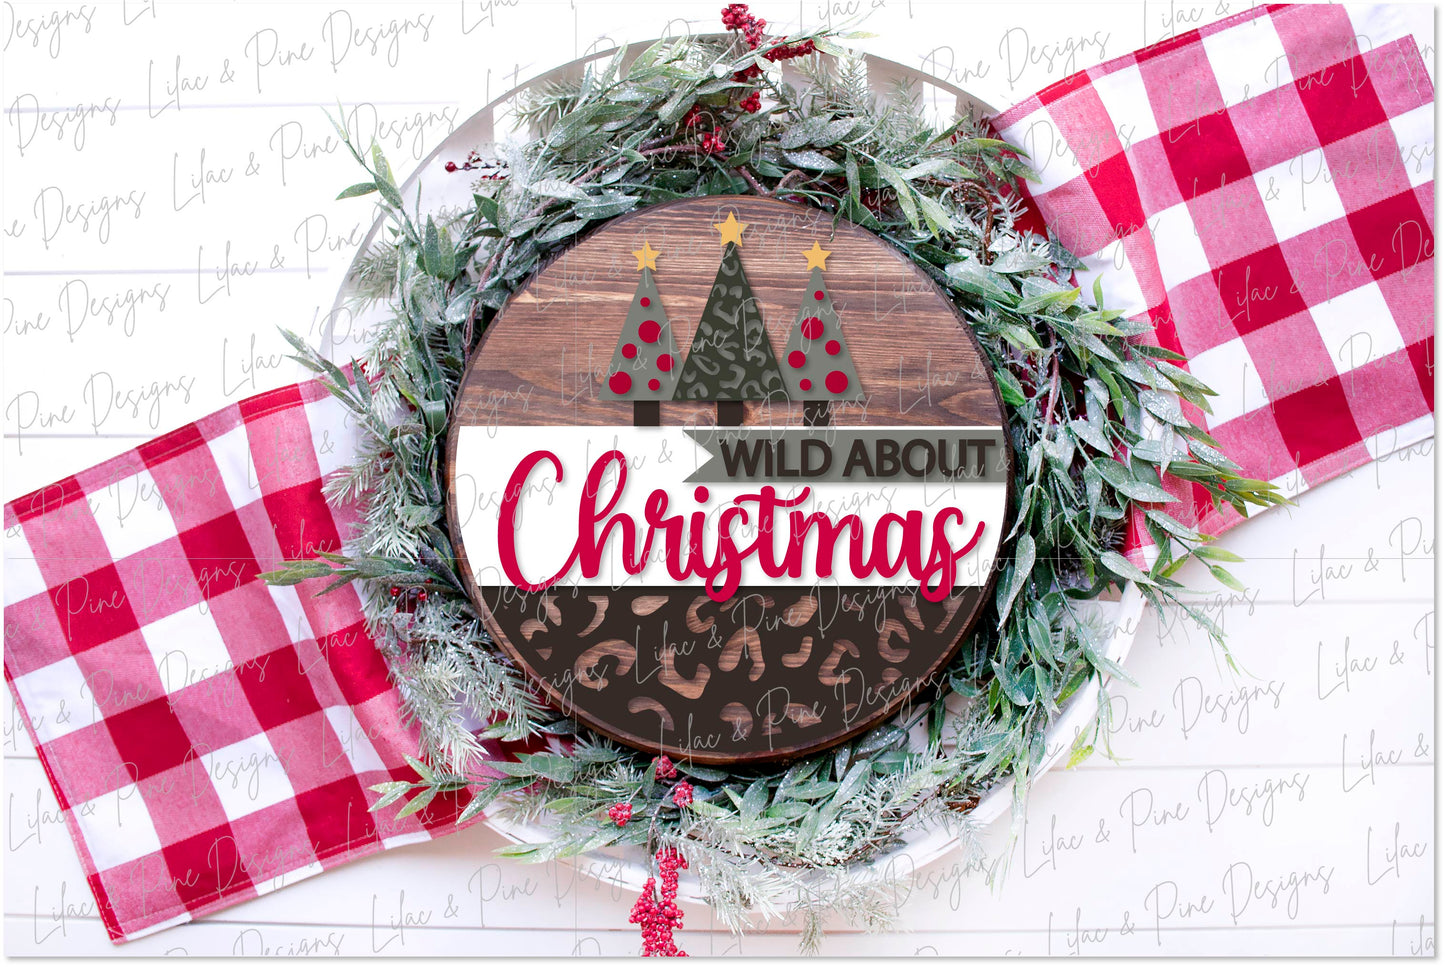 Wild about Christmas door round SVG, Christmas welcome SVG, Christmas tree SVG, leopard Christmas, laser cut file, Glowforge SVG